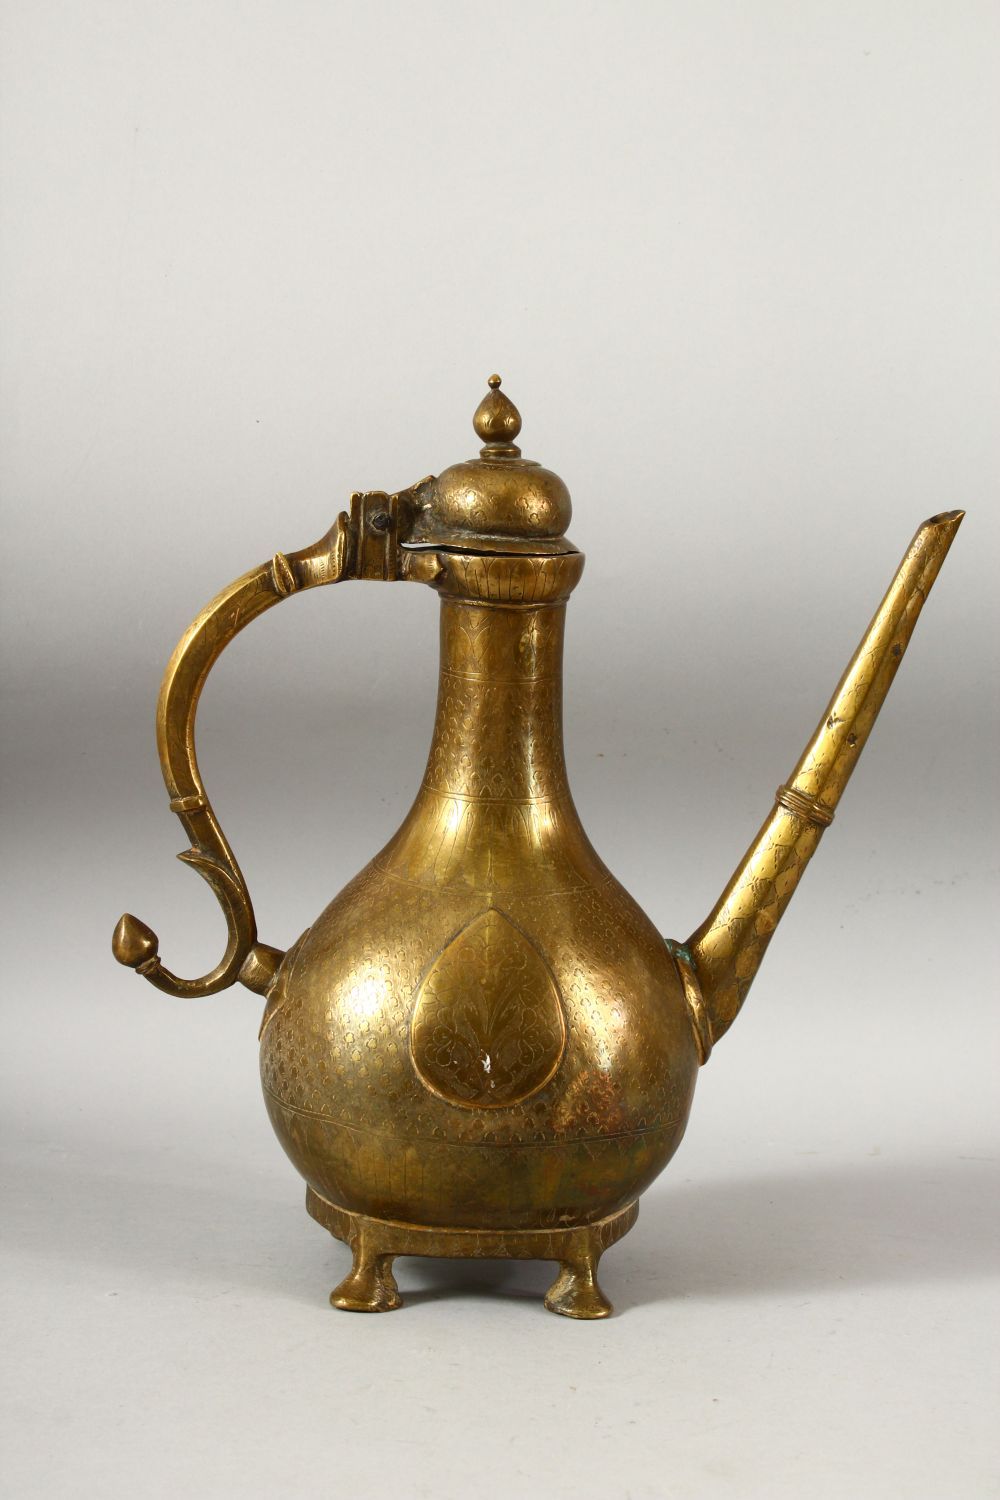 A LARGE 18TH CENTURY MUGHAL INDIAN BRASS EWER, with engraved / chased decoration, 32cm high. - Image 3 of 7